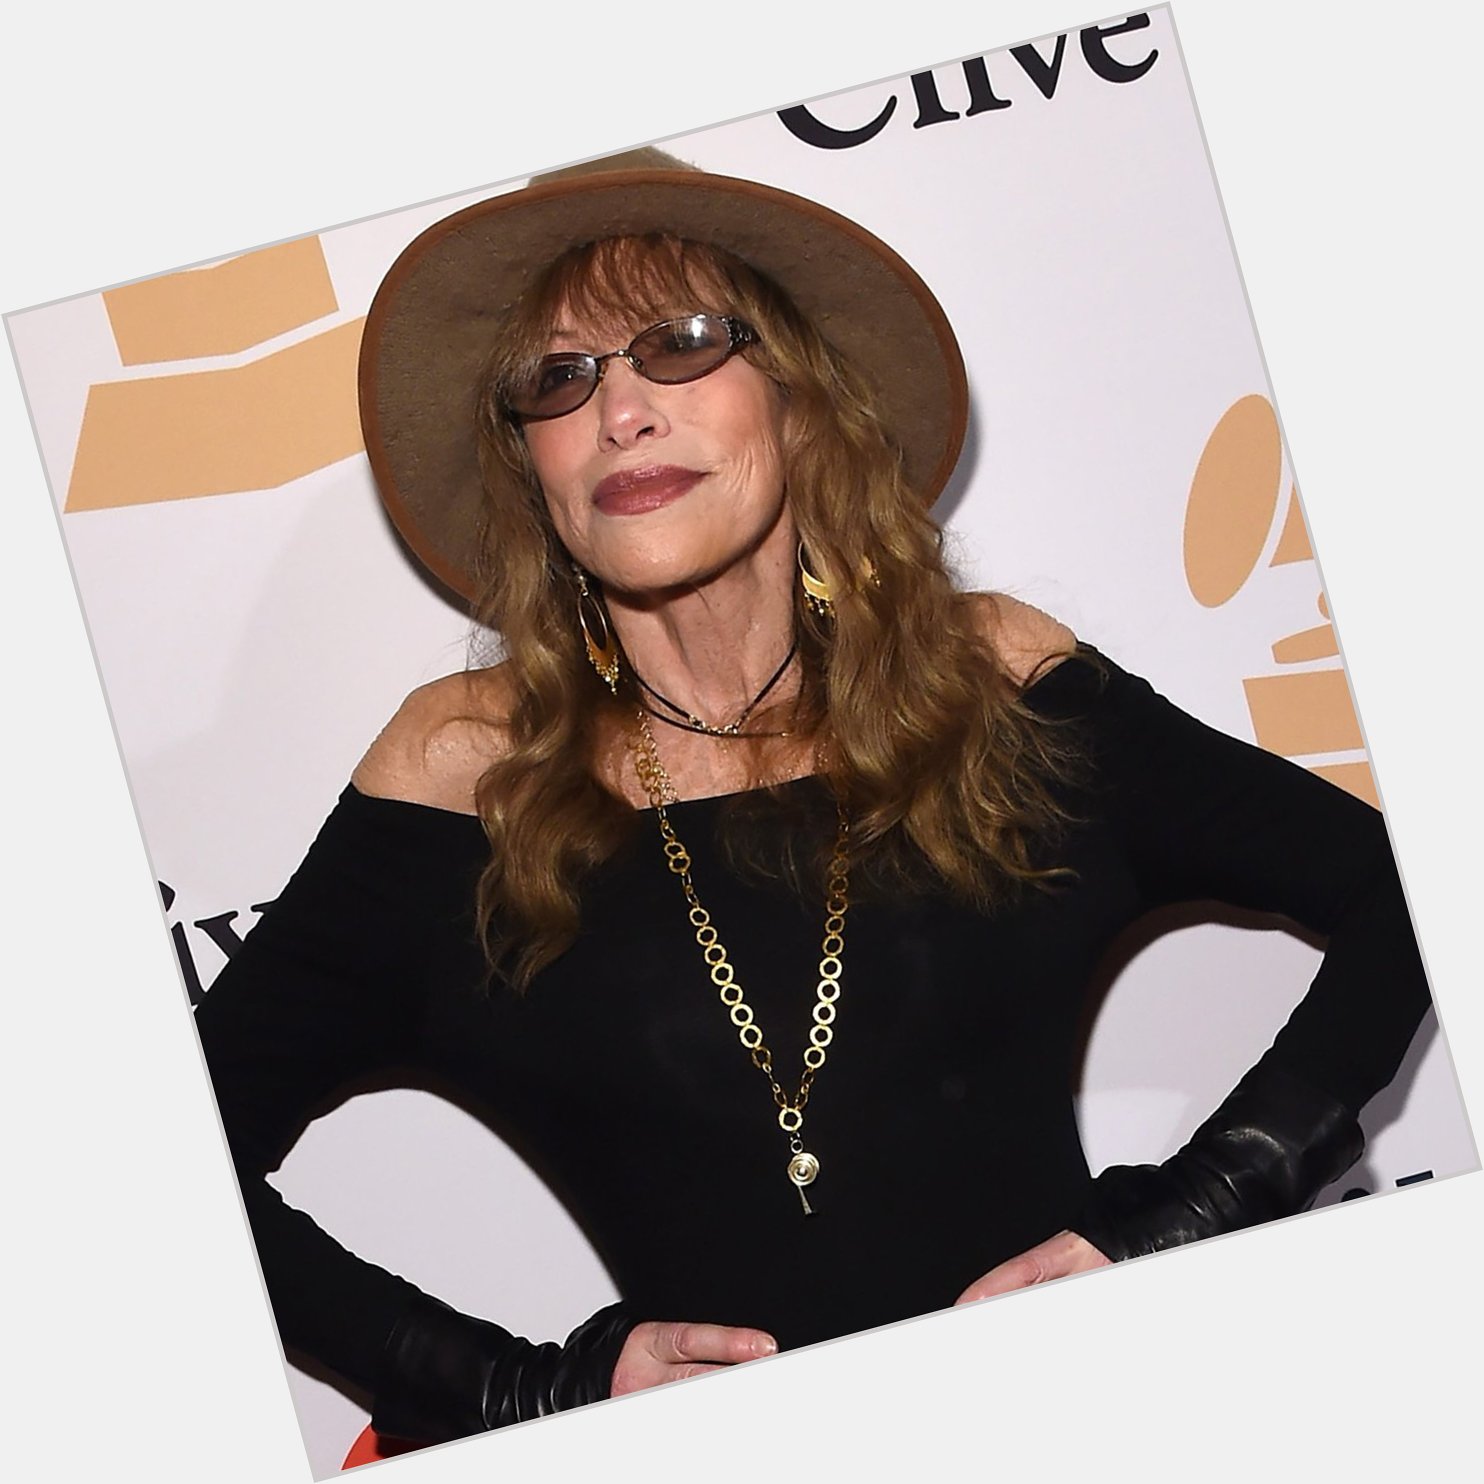 Happy Birthday Carly Simon I still want to know who she was singing about in You\re So Vain. Warren Beatty? 